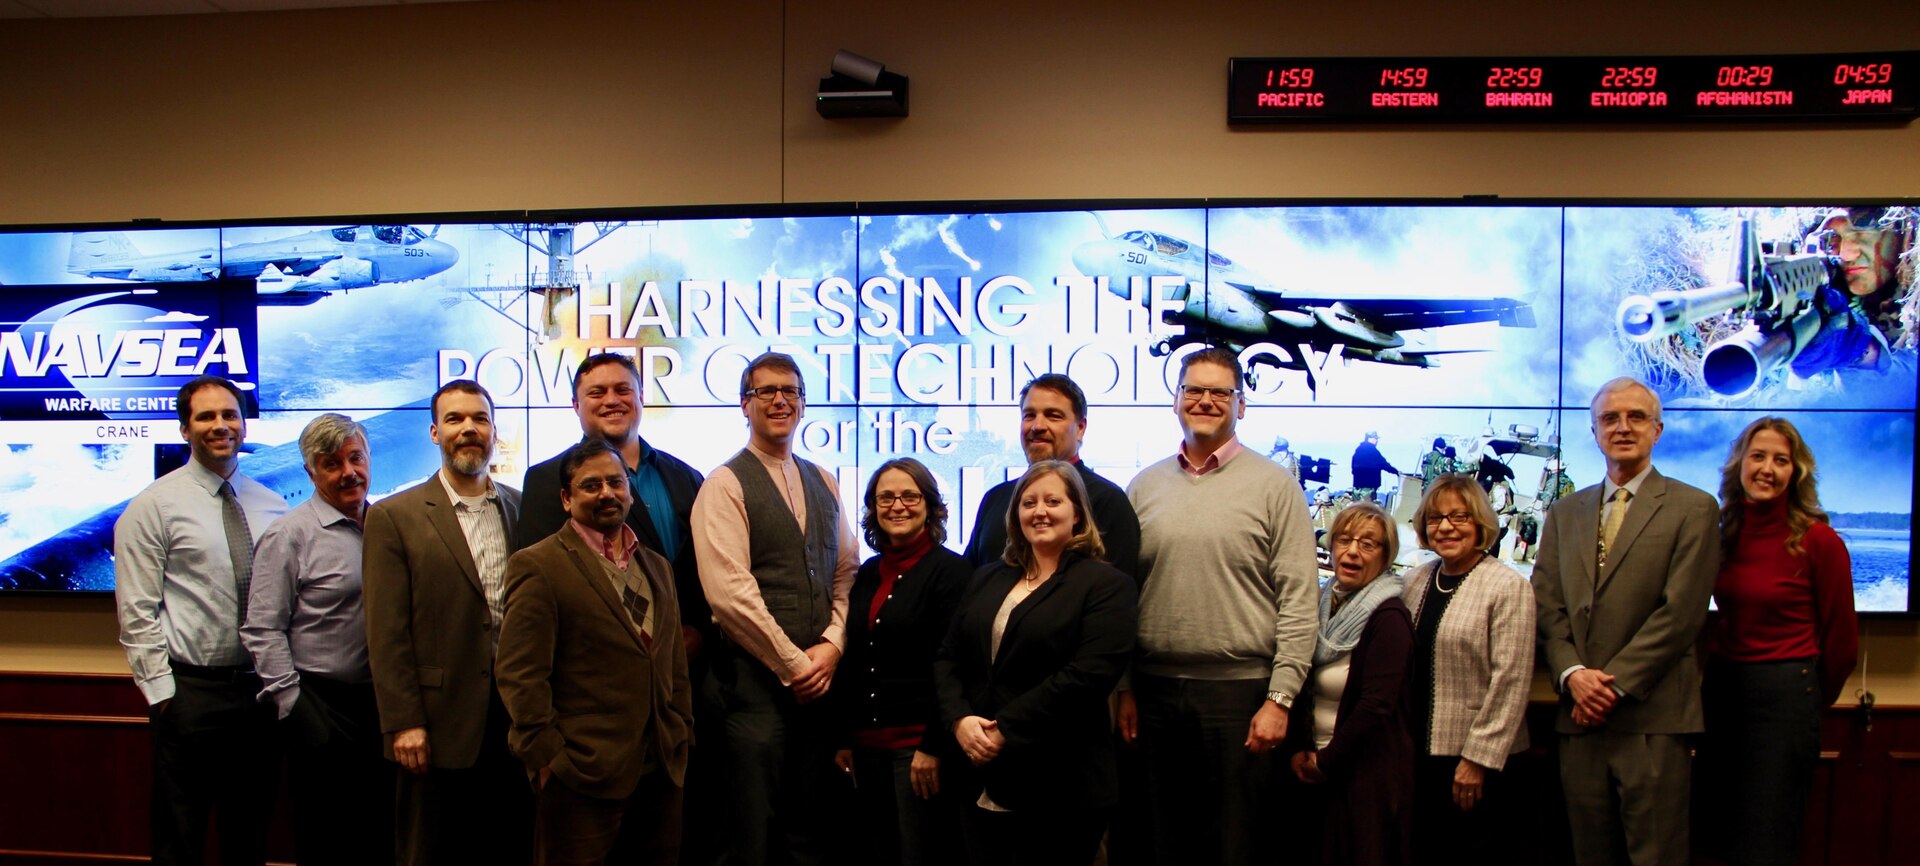 Representatives from TechLink – a Department of Defense Partnership Intermediary at Montana State University, attended the Innovation Discovery Event hosted by NSWC Crane's Technology Transfer (T2) Office in partnership with the Office of Naval Research (ONR). 